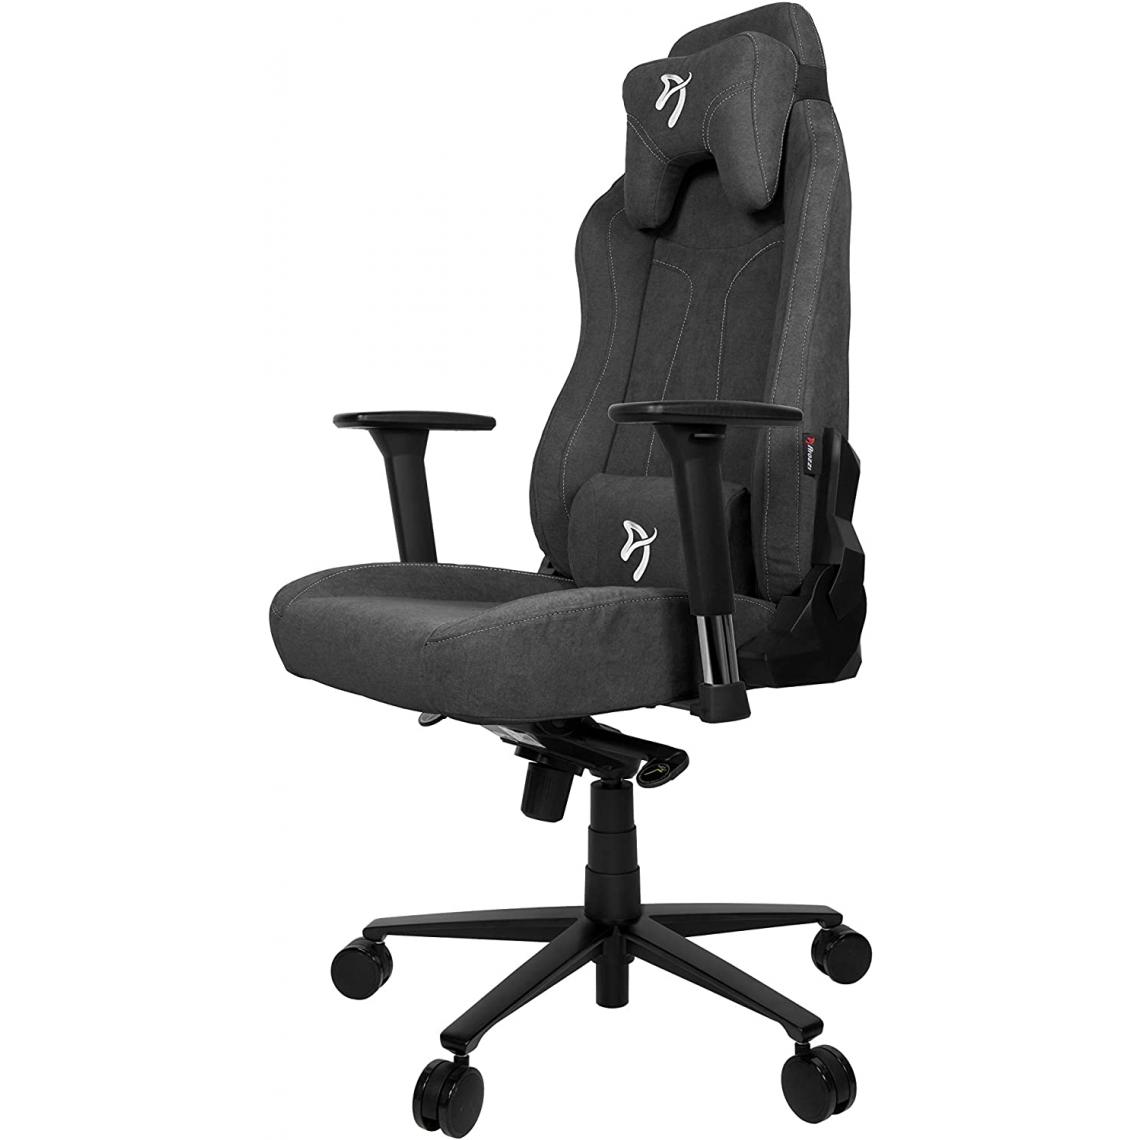 Arozzi - Fauteuil gaming Vernazza Arozzi Soft Fabric gris sombre - Chaise gamer